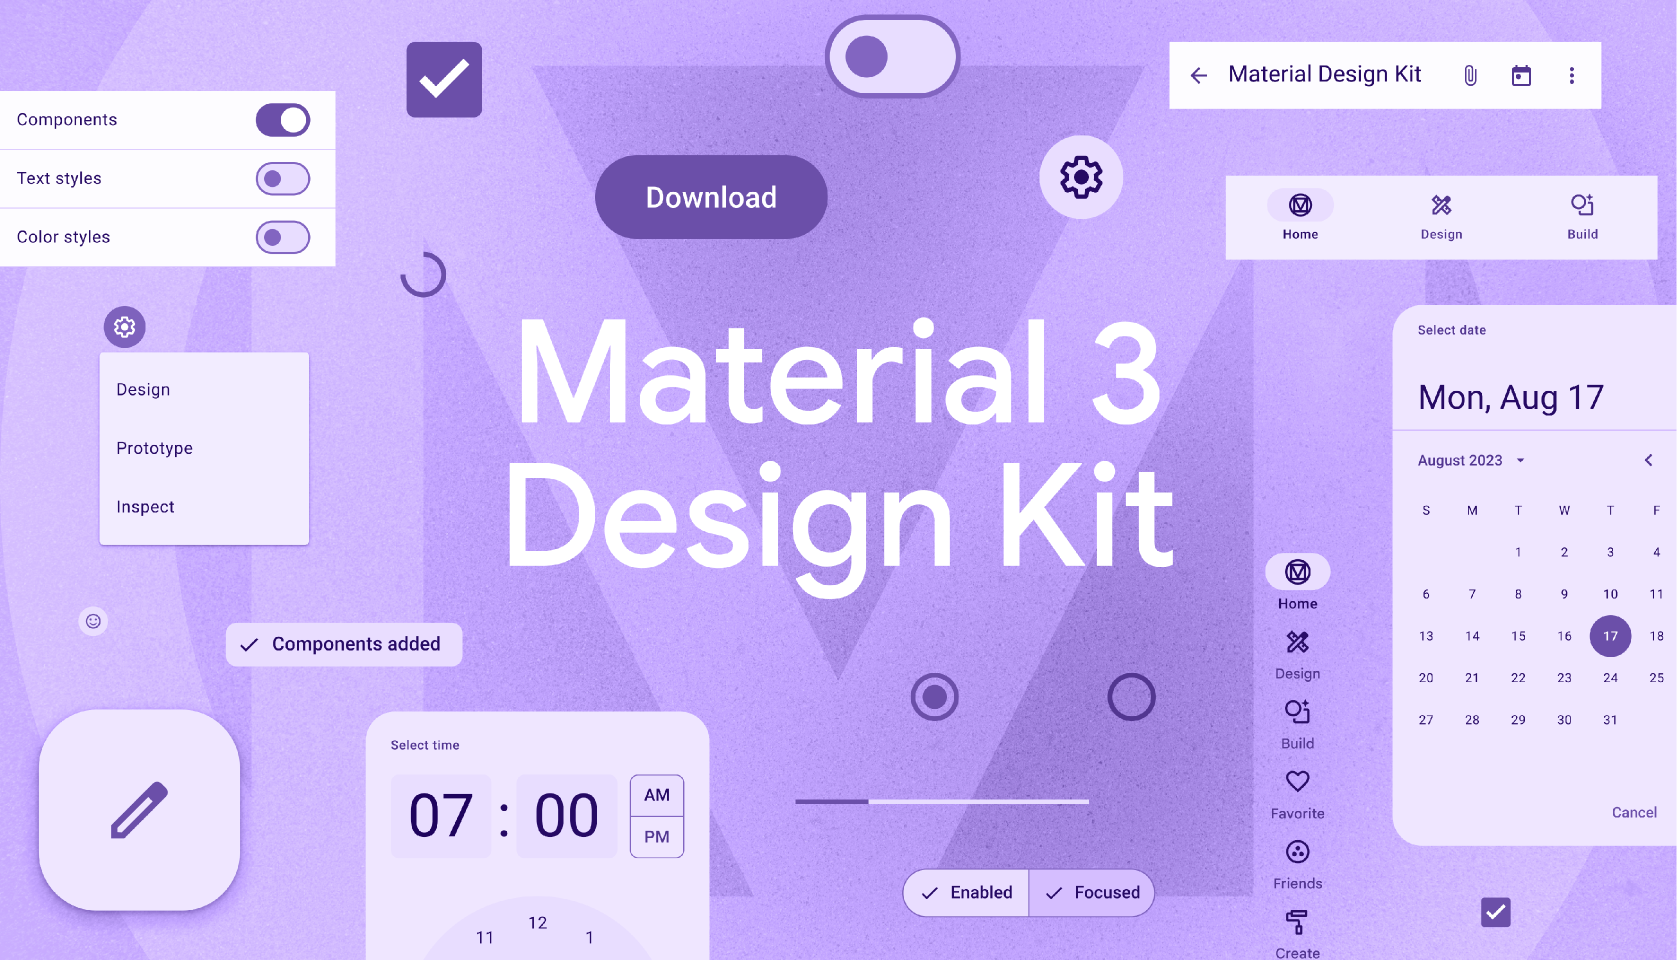 6 Cool New Things From Material Design and Android 14